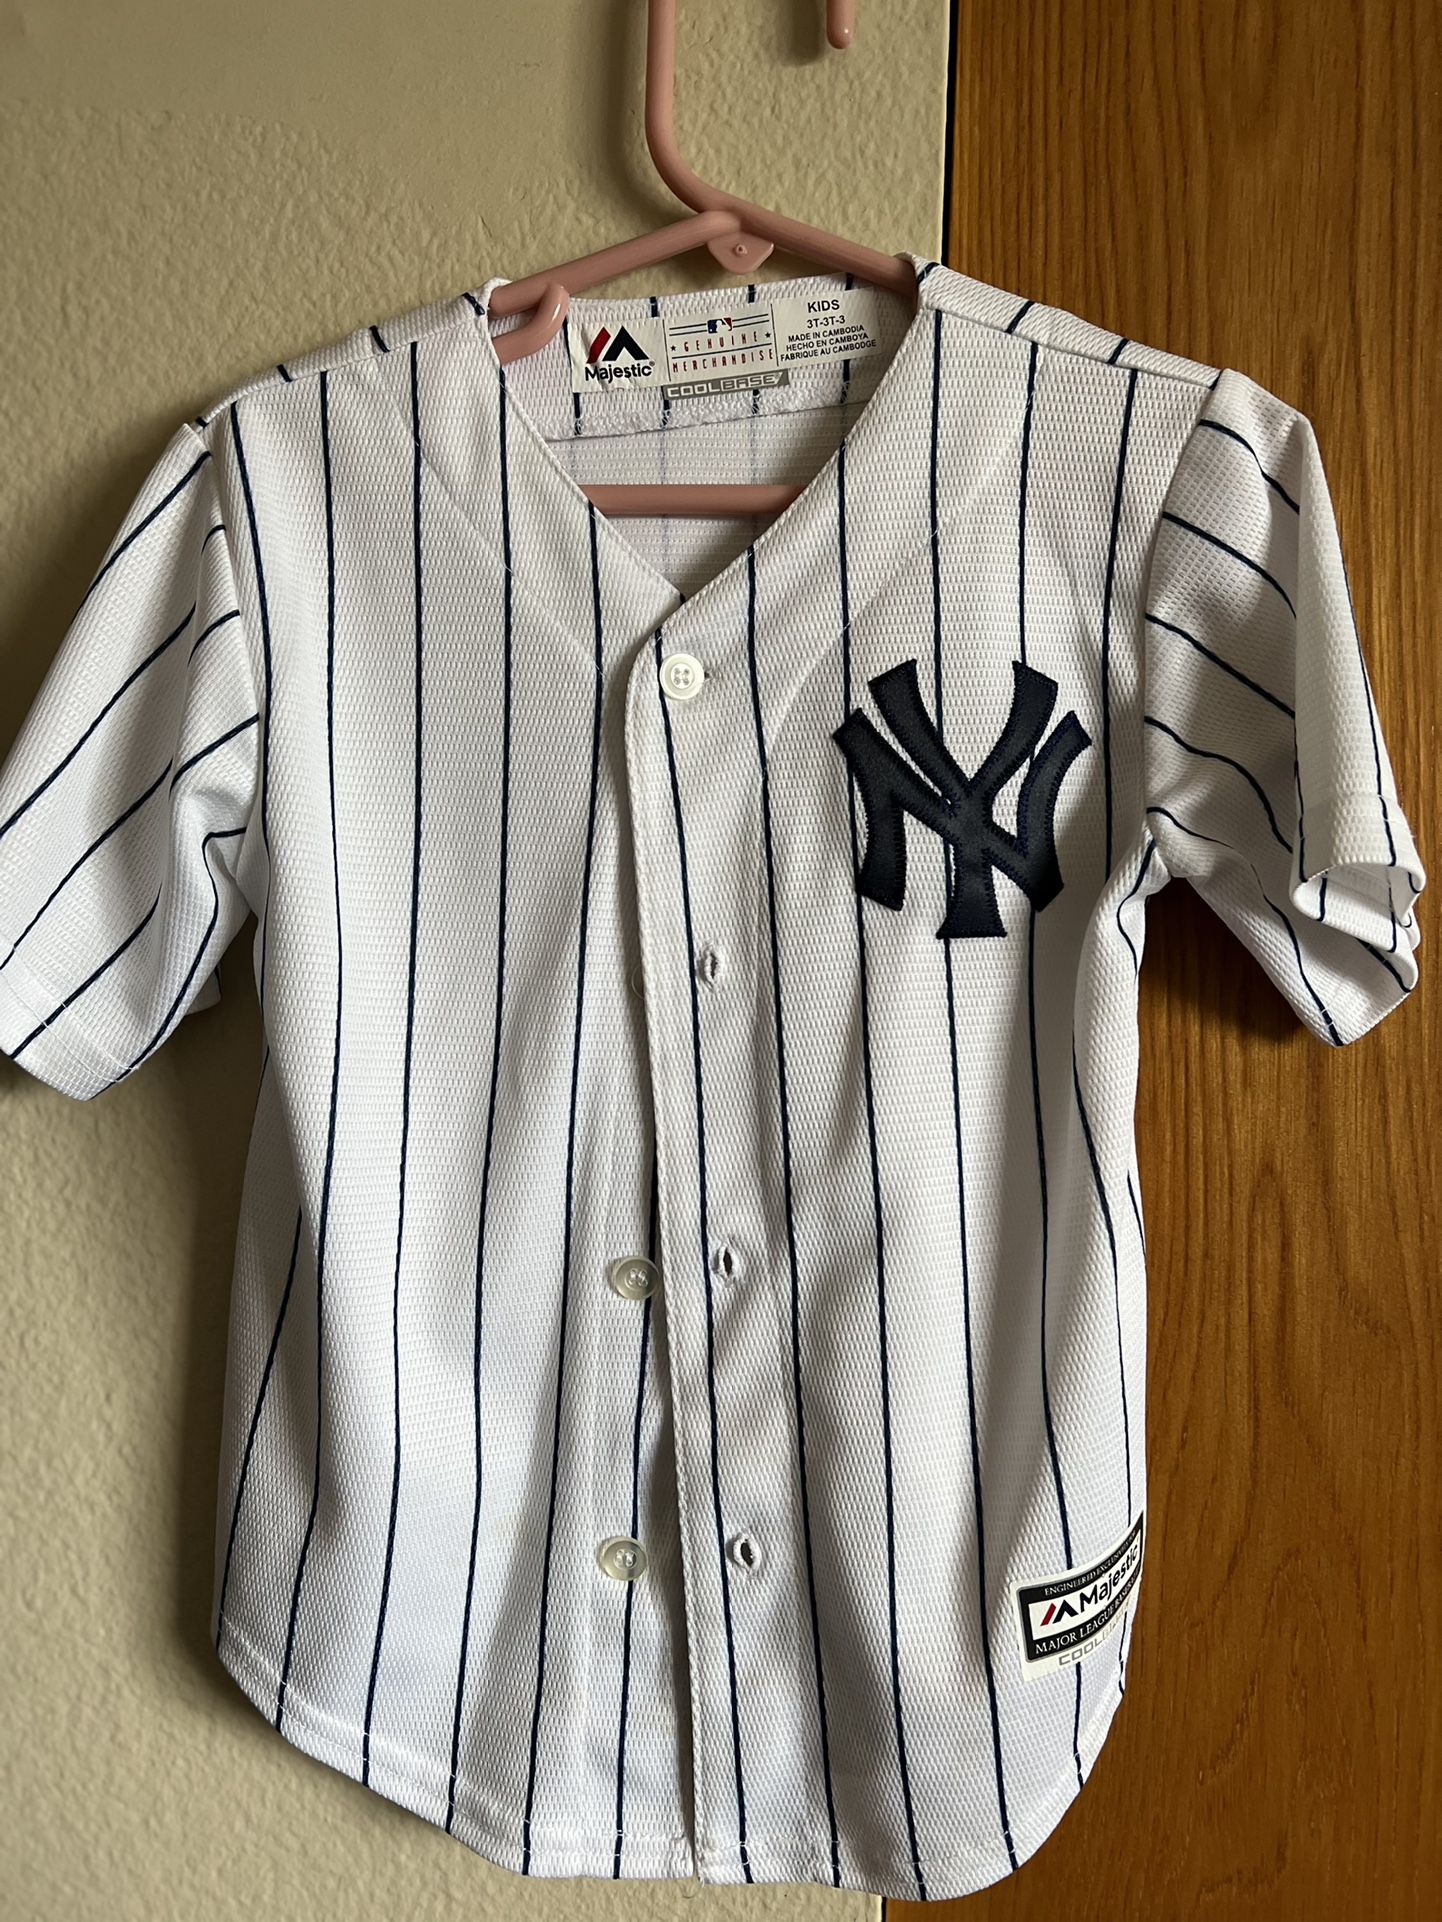 Toddler Yankees jersey for Sale in Downey, CA - OfferUp